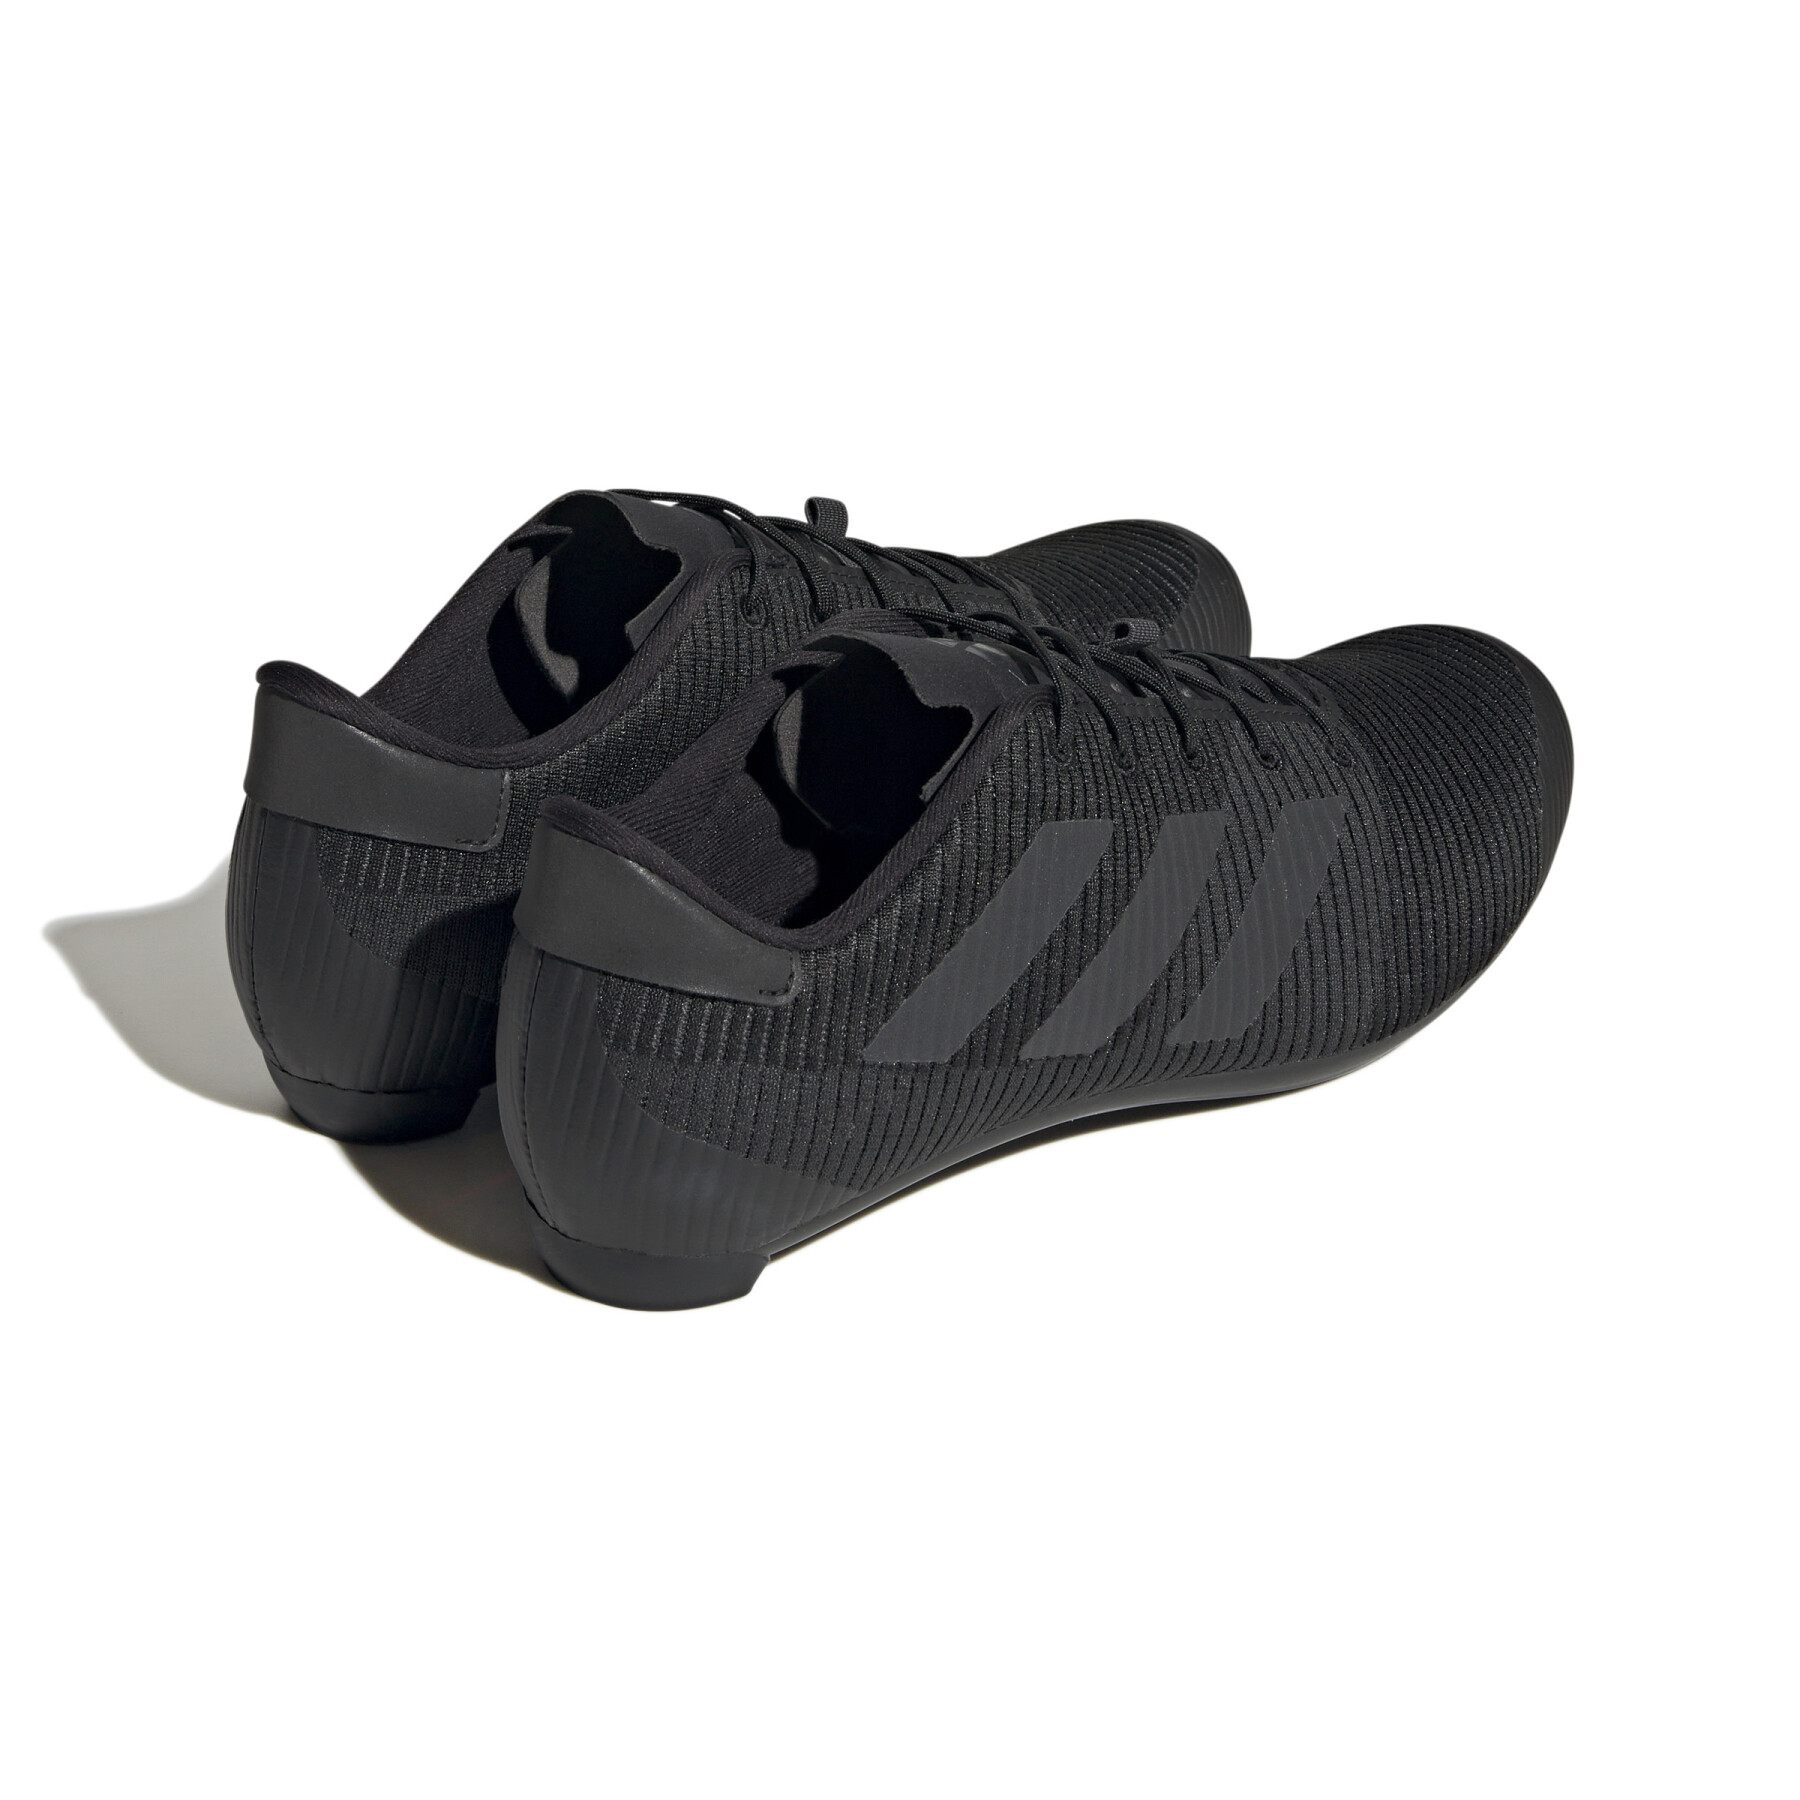 Chaussures vélo enfant adidas The Road 2.0